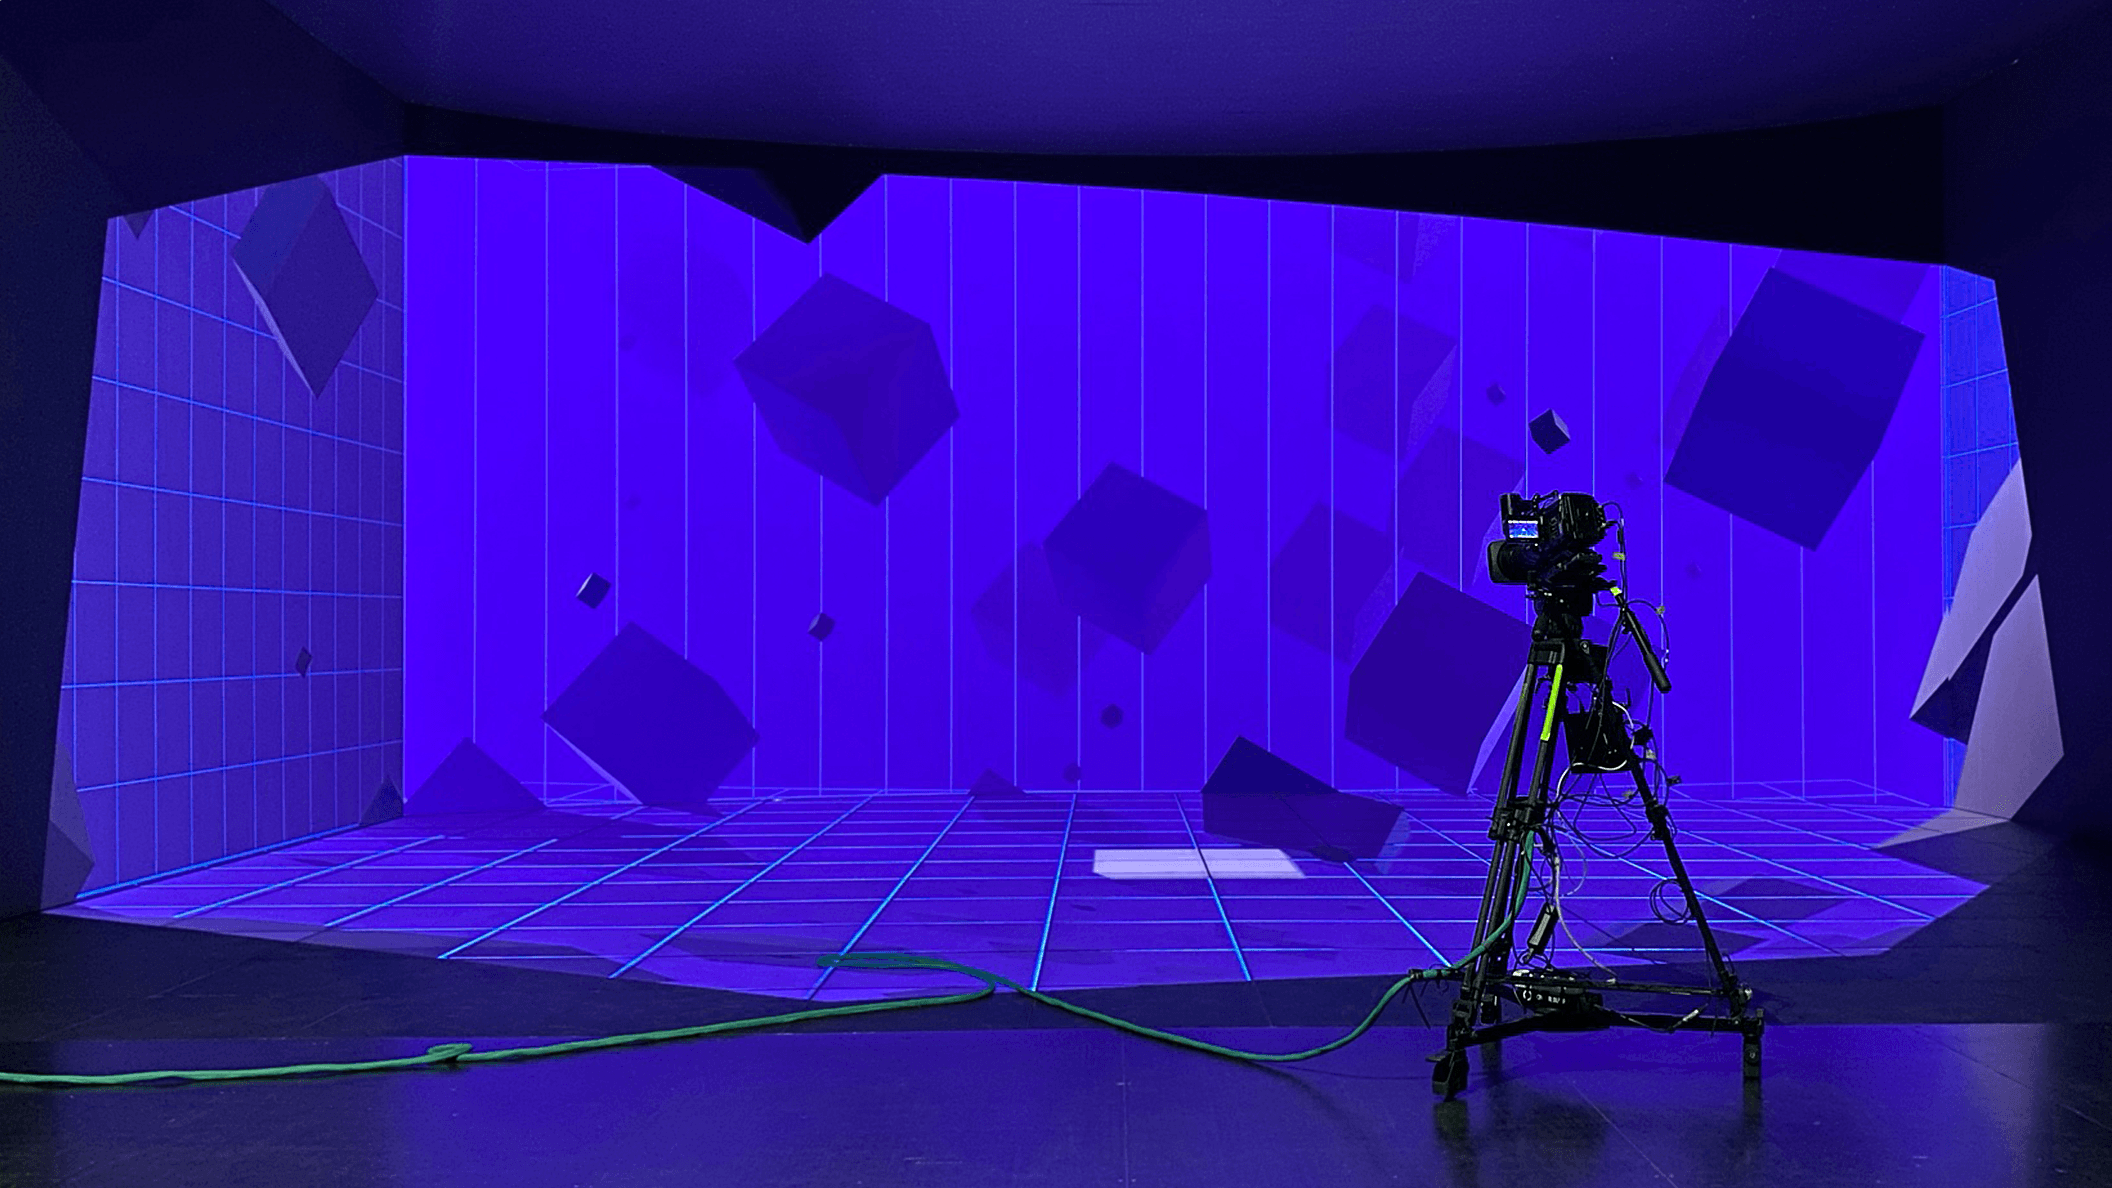 Camera equipped with a real-time optical camera tracking system in front of the LED volume, highlighting Screenberry's camera tracking feature for XR TV studios and film sets